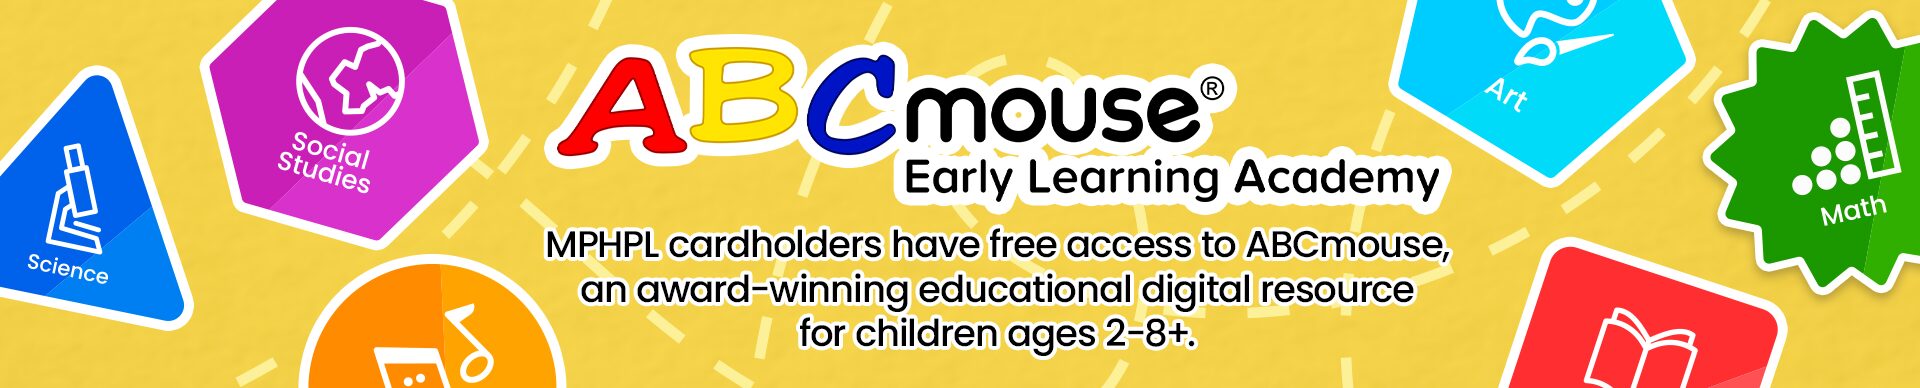 ‘ABCmouse Early Learning Academy MPHPL cardholders have free access to ABCmouse, an award-winning educational digital resource for children ages 2-8+.’